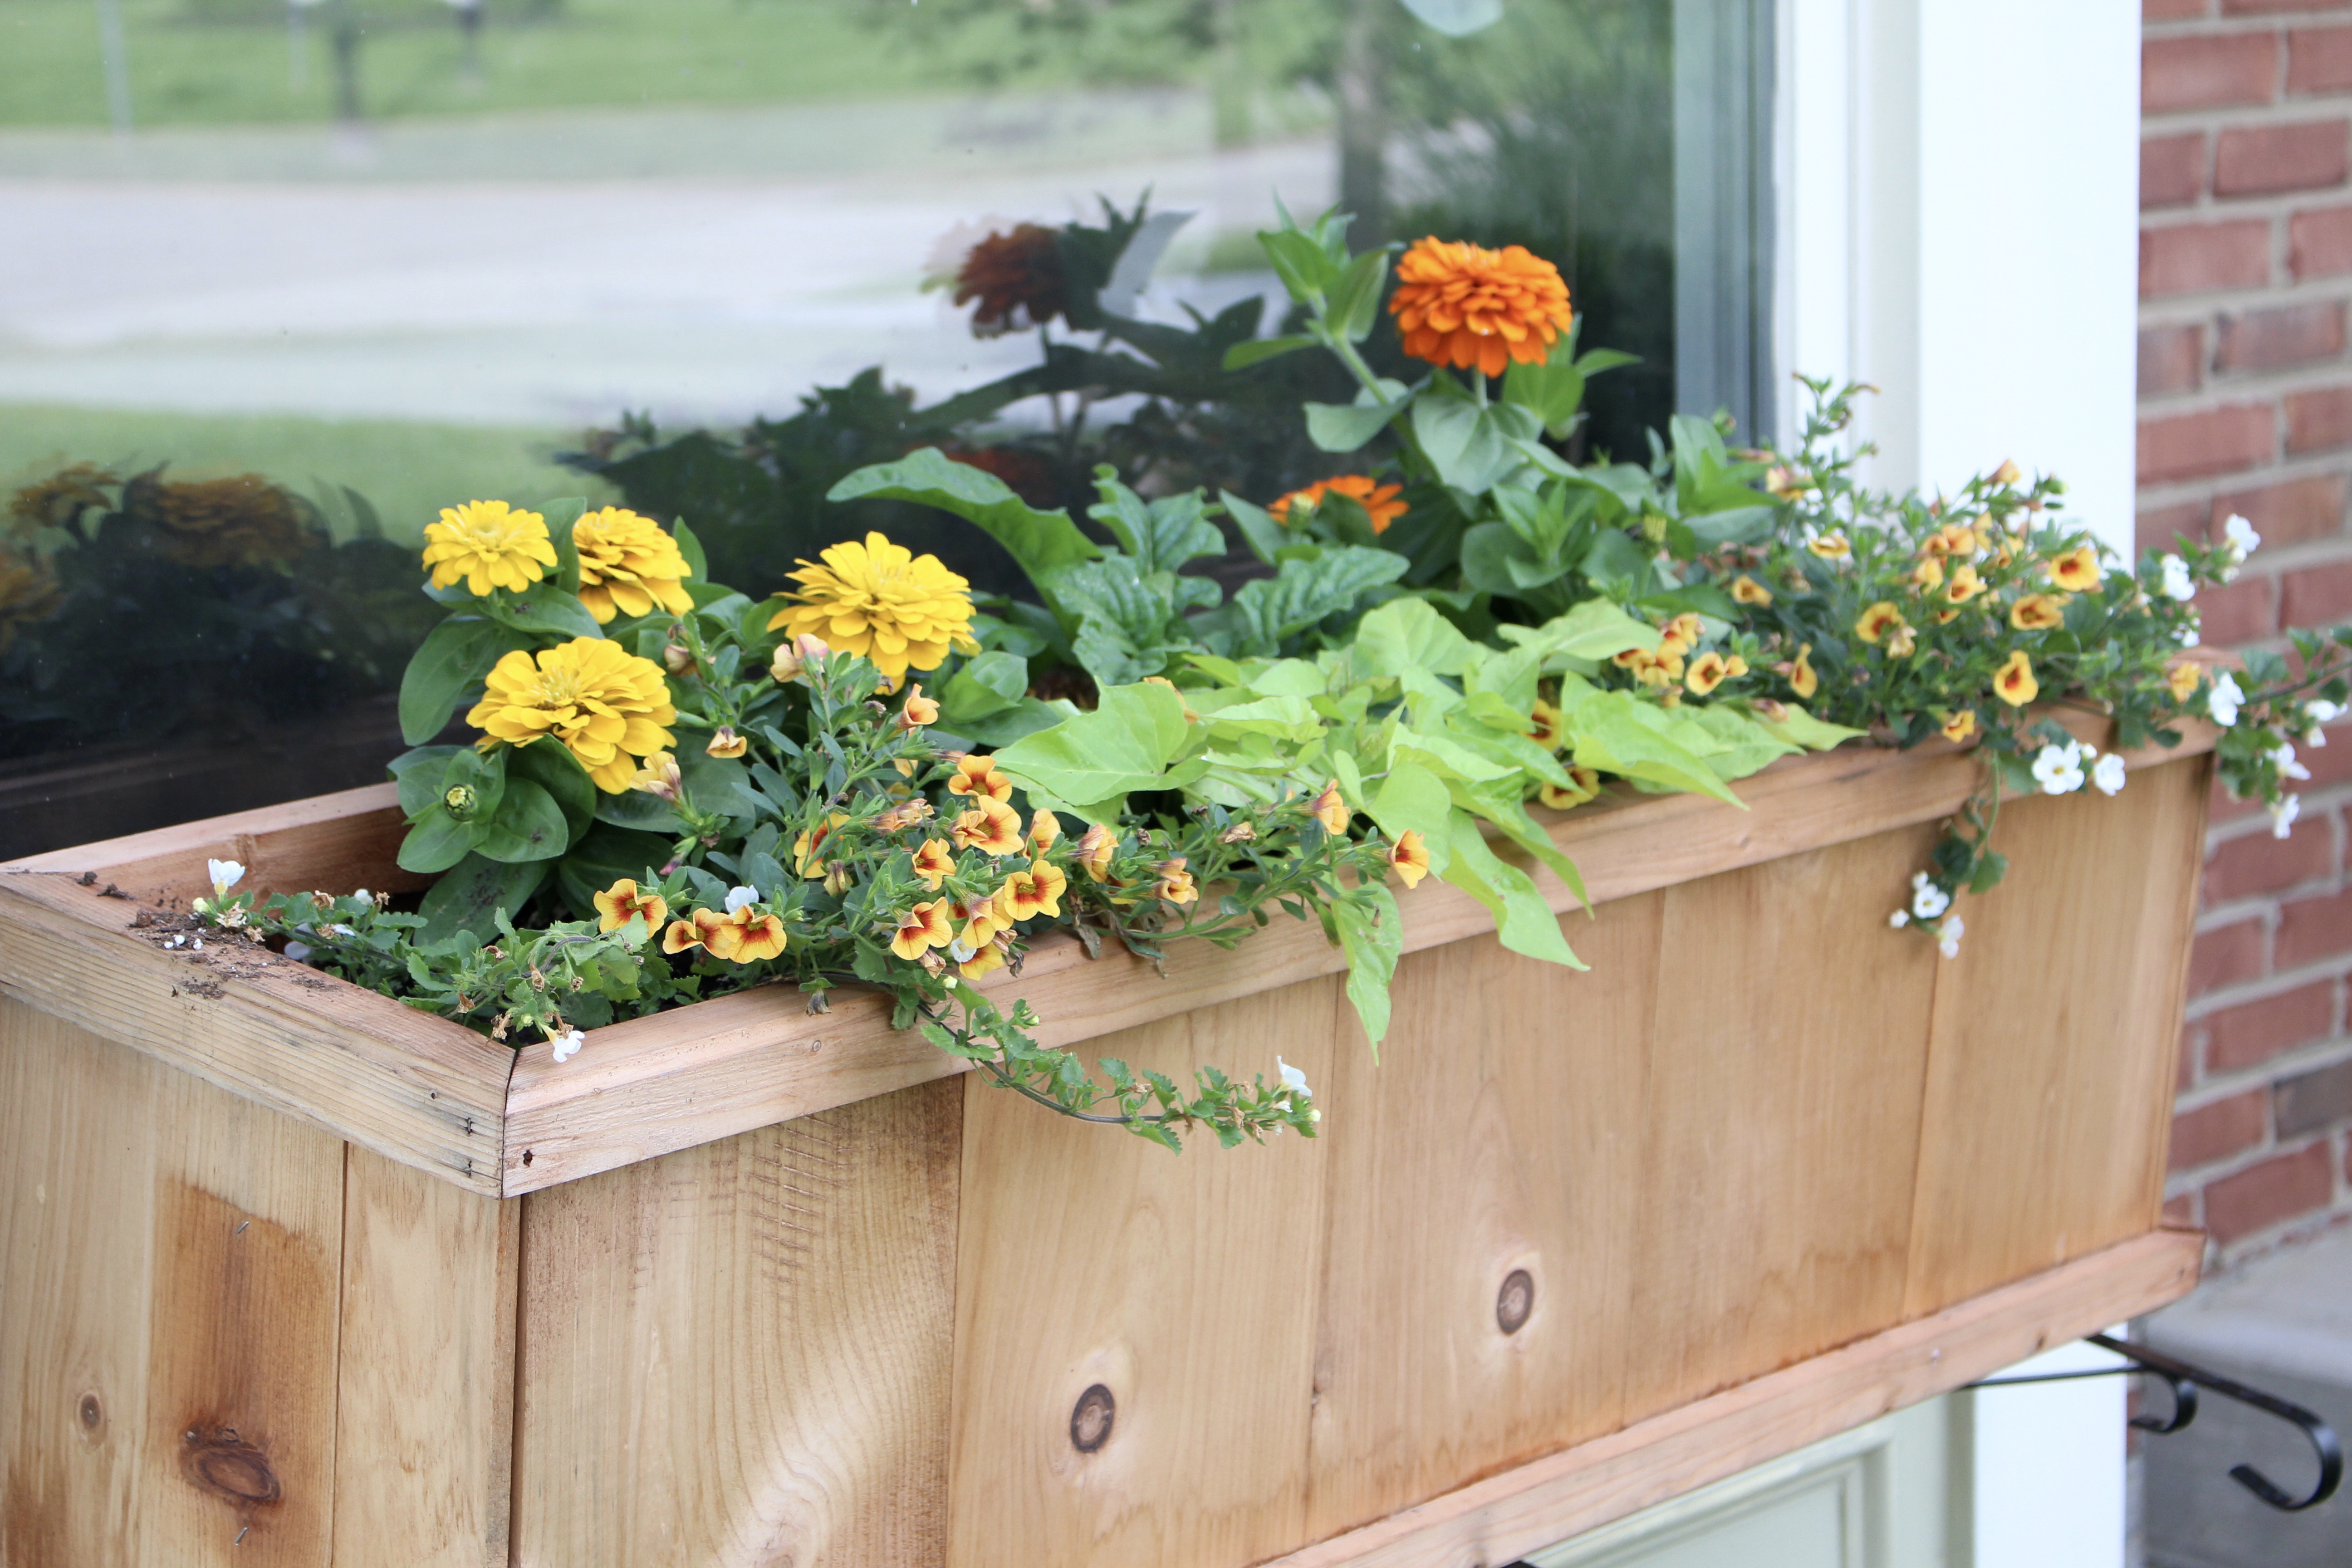 Summer Window Box Plantings for Garden Hop Tour by www.whitecottagehomeandliving.com